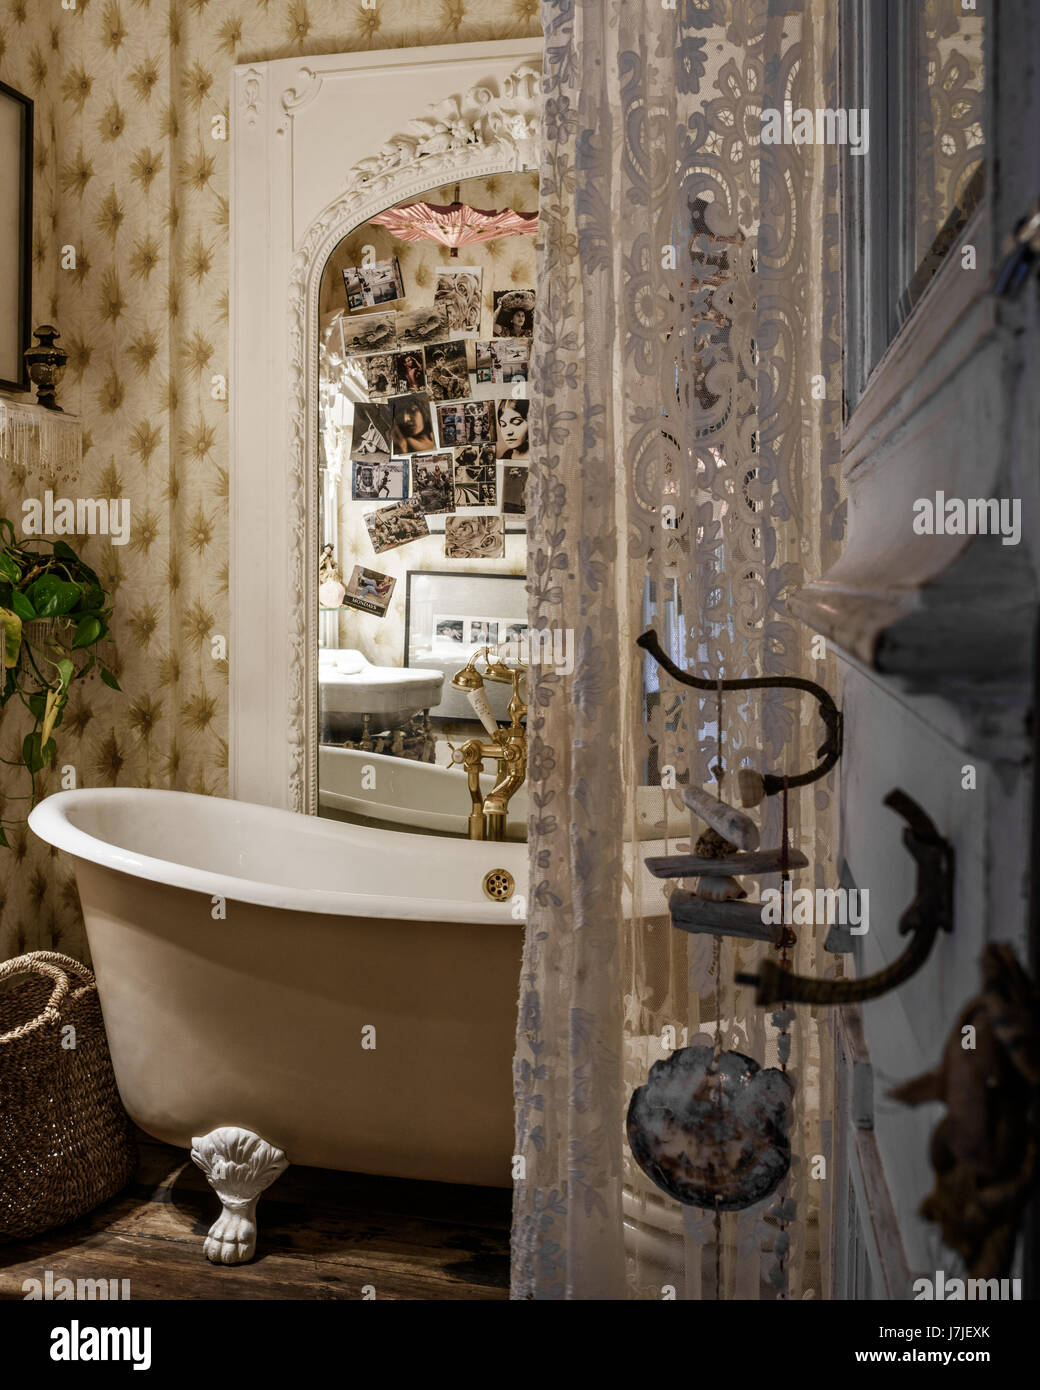 Ornate overmantel with lace fabric and claw-foot bath Stock Photo